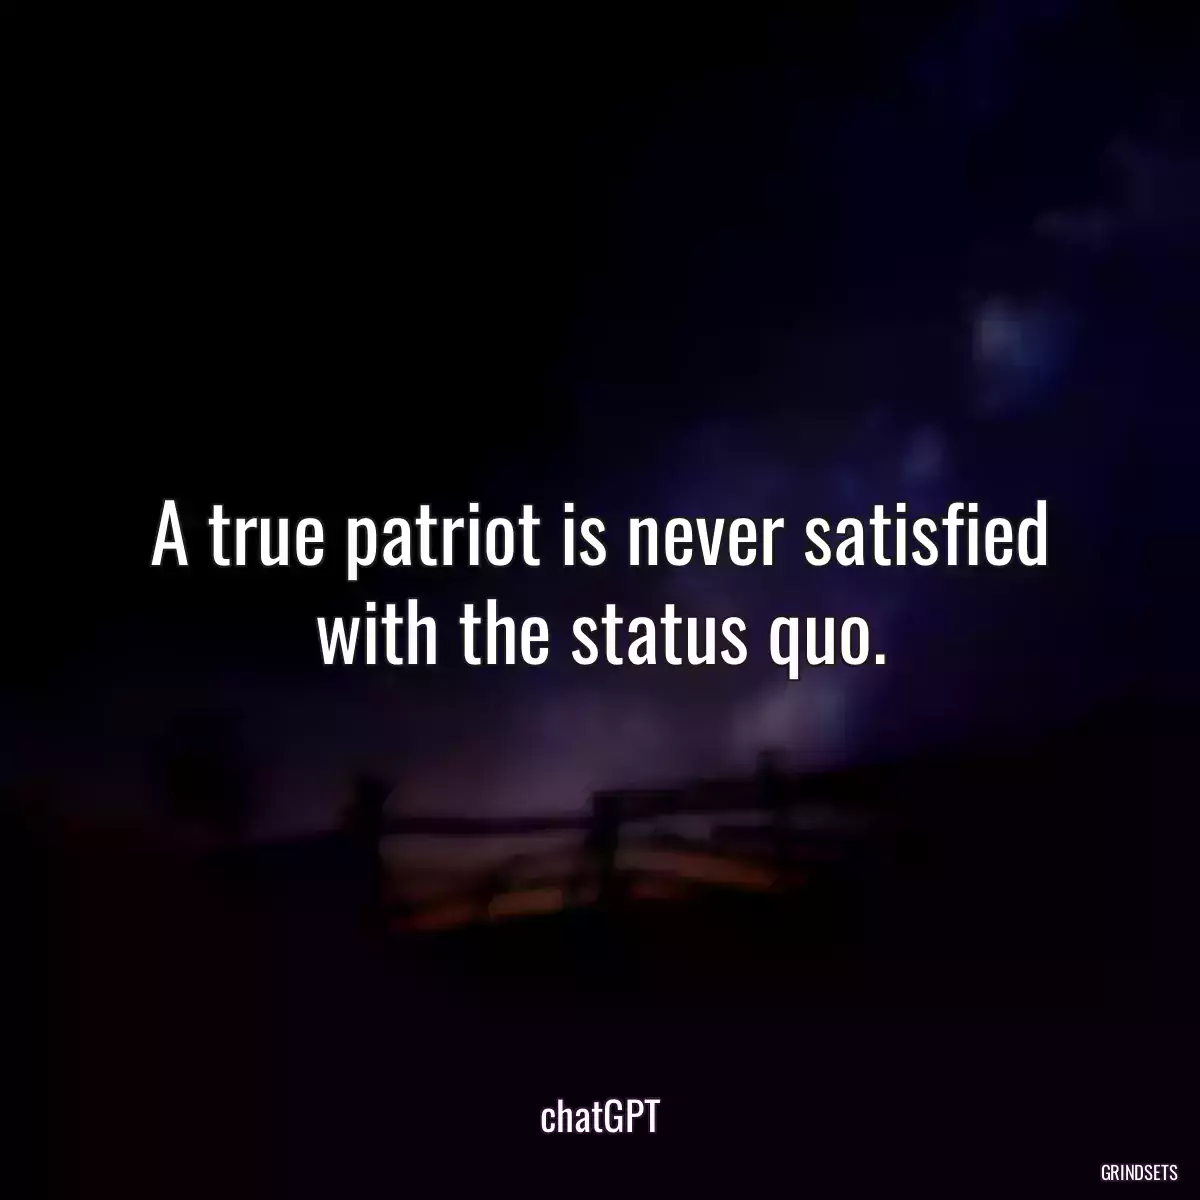 A true patriot is never satisfied with the status quo.